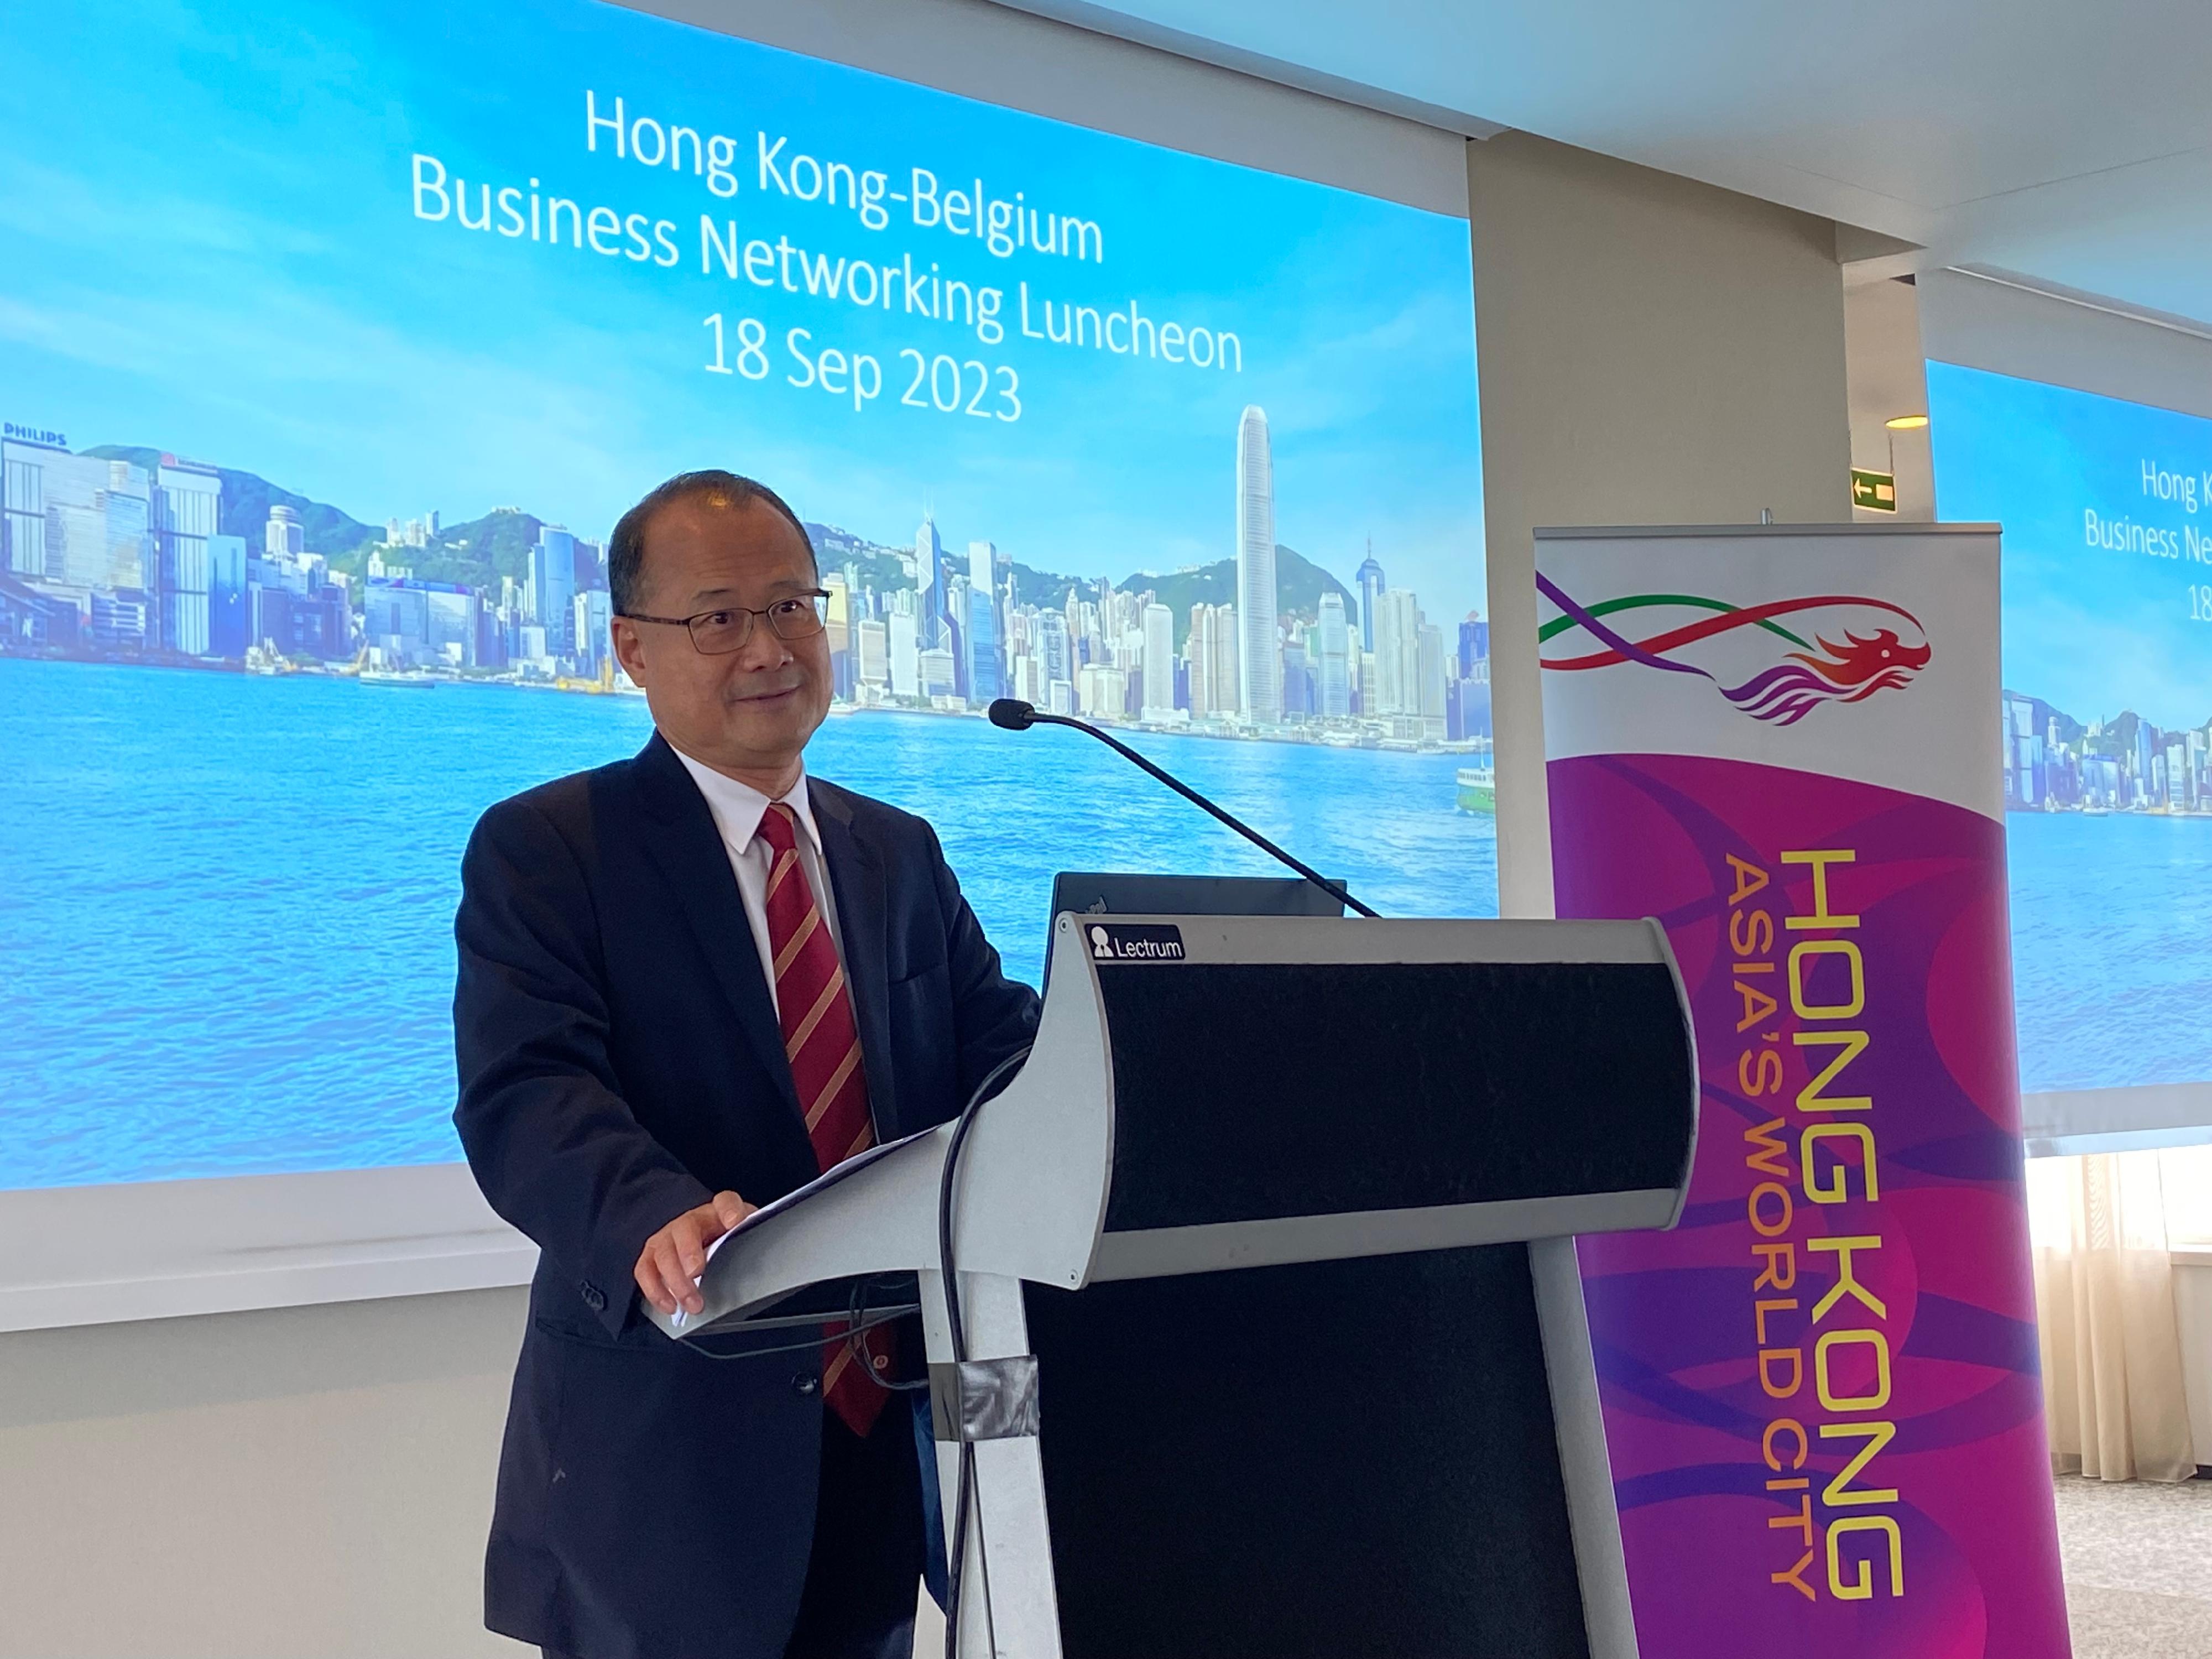 The Chairman of the Chinese General Chamber of Commerce, Dr Jonathan Choi, gave Belgian entrepreneurs insight into opportunities offered by Hong Kong as a regional gateway at the Hong Kong-Belgium business networking luncheon held on September 18 (Brussels time).